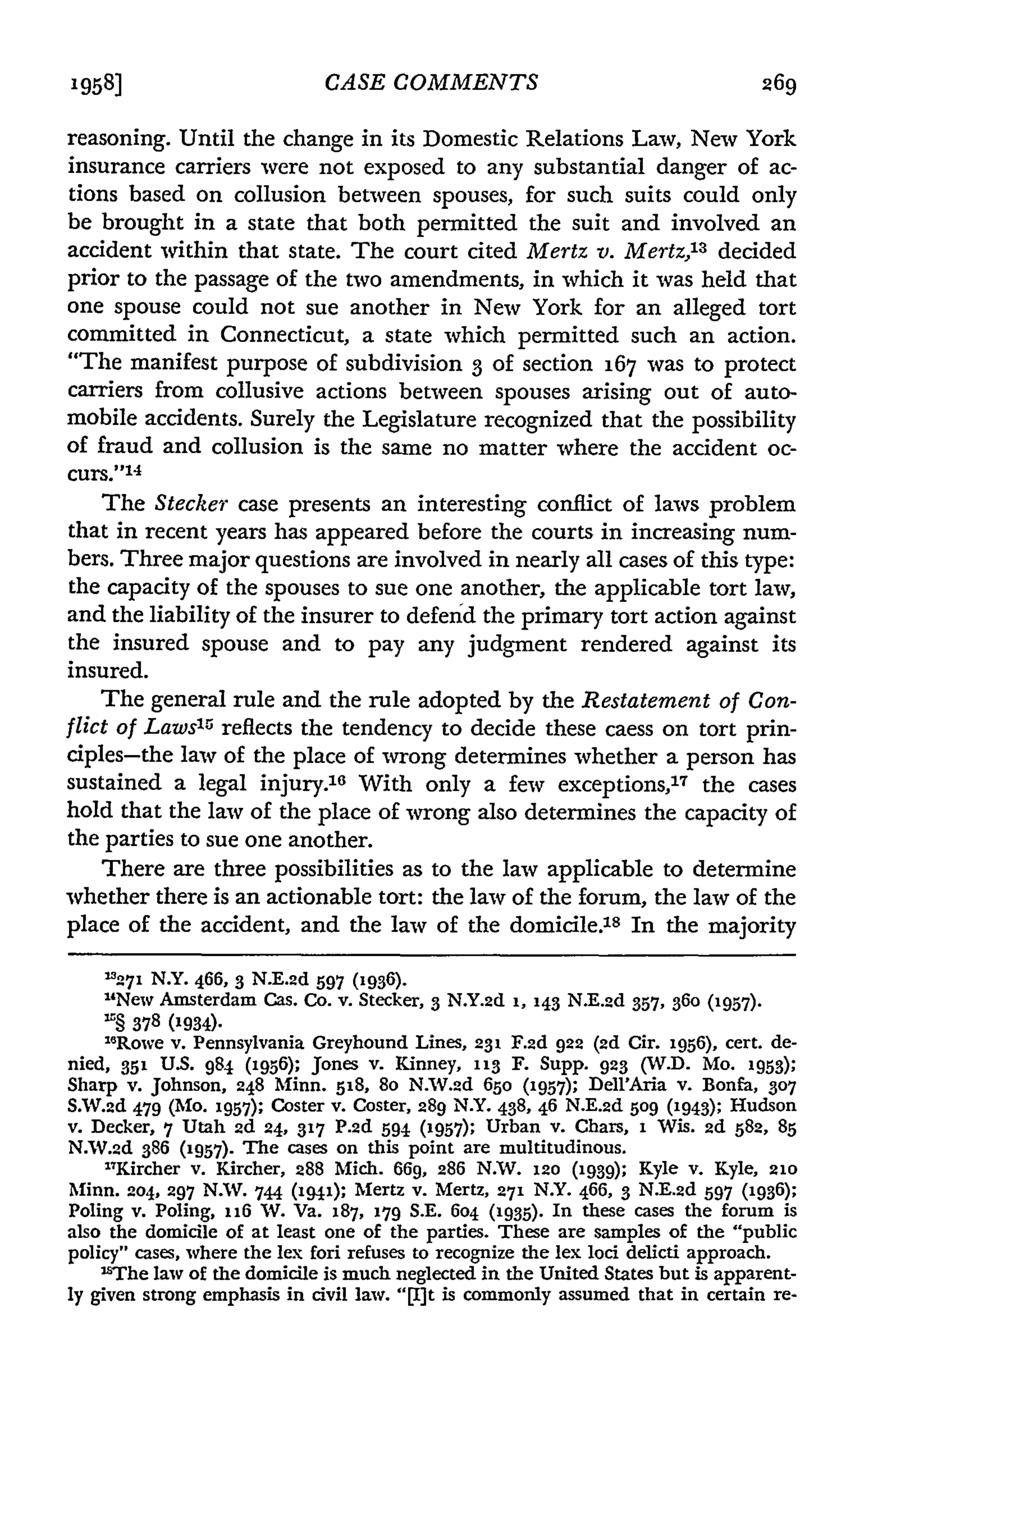 1958] CASE COMMENTS reasoning.